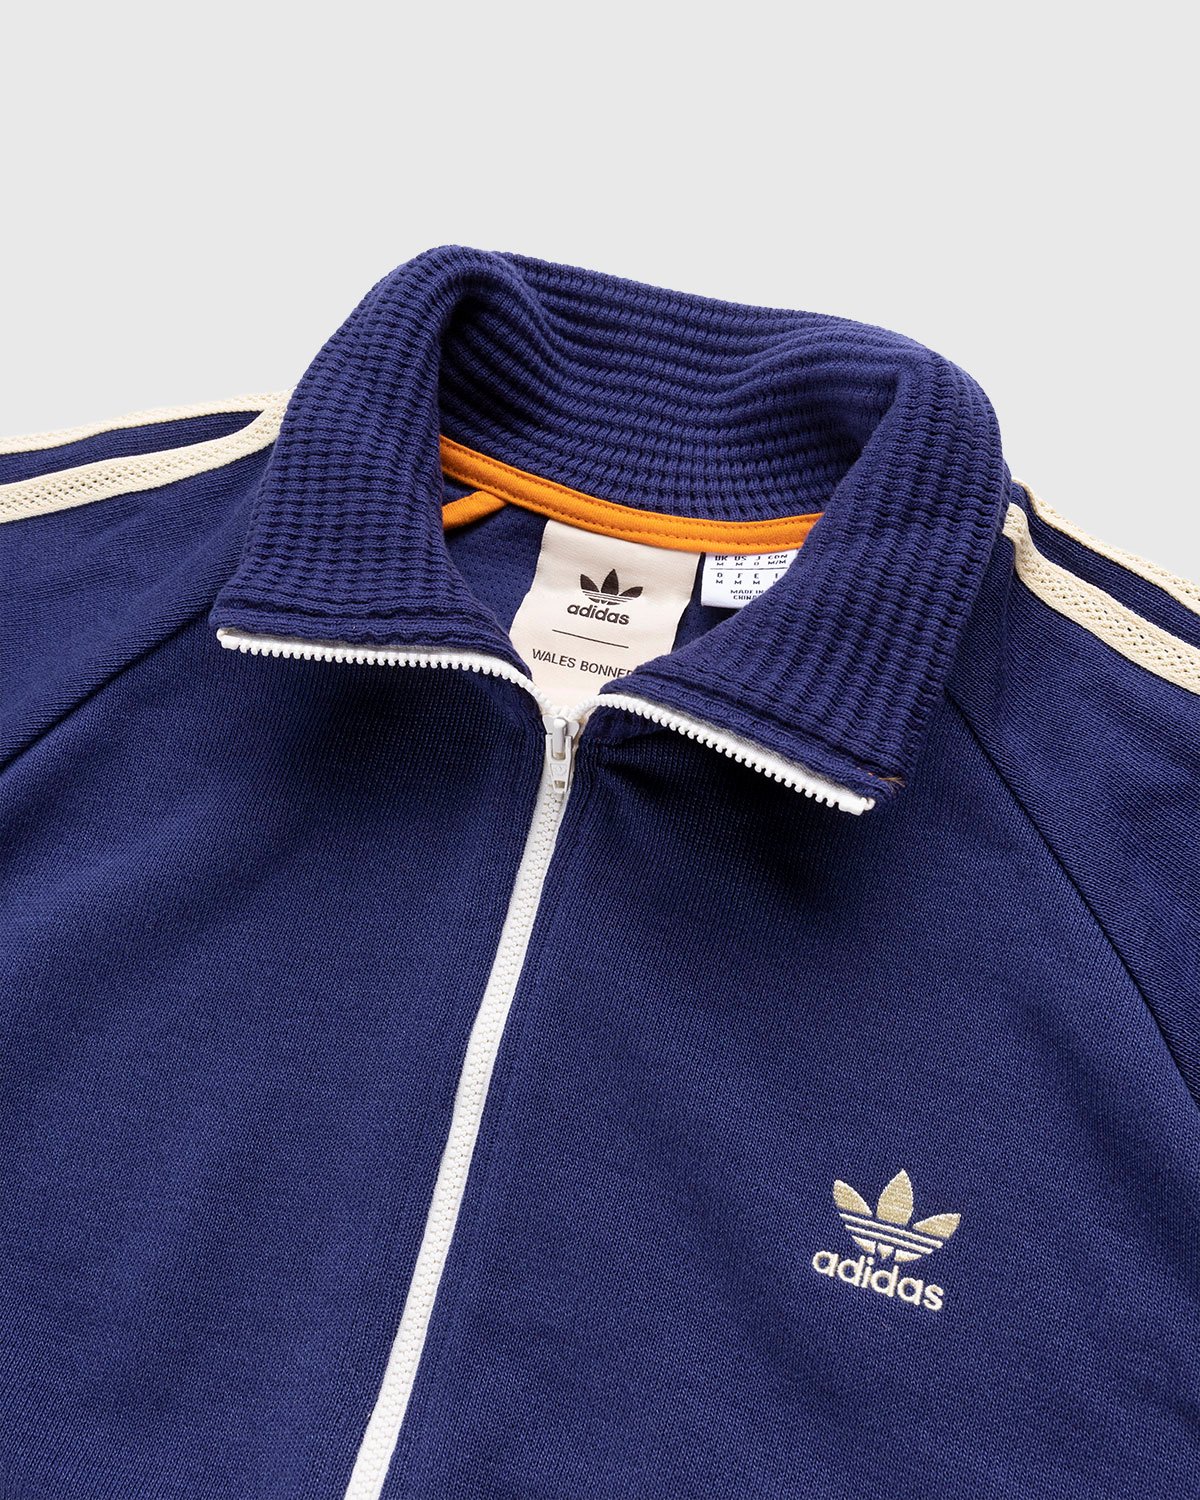 Adidas x Wales Bonner - 80s Track Top Night Sky - Clothing - Blue - Image 3